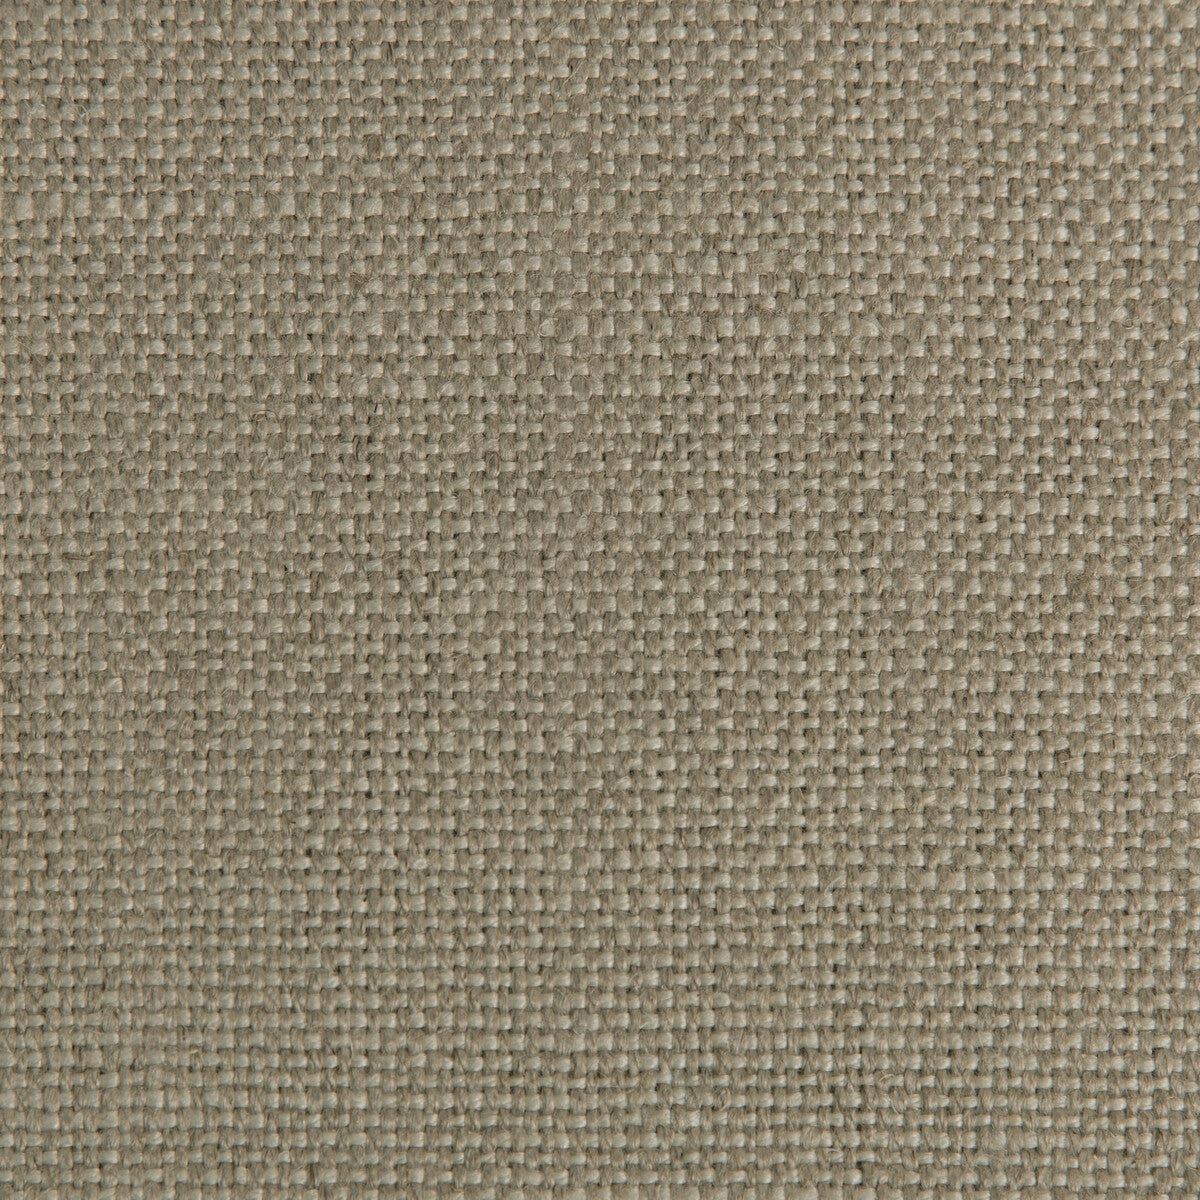 Buckley fabric in linen color - pattern 30983.1616.0 - by Kravet Design in the Thom Filicia collection